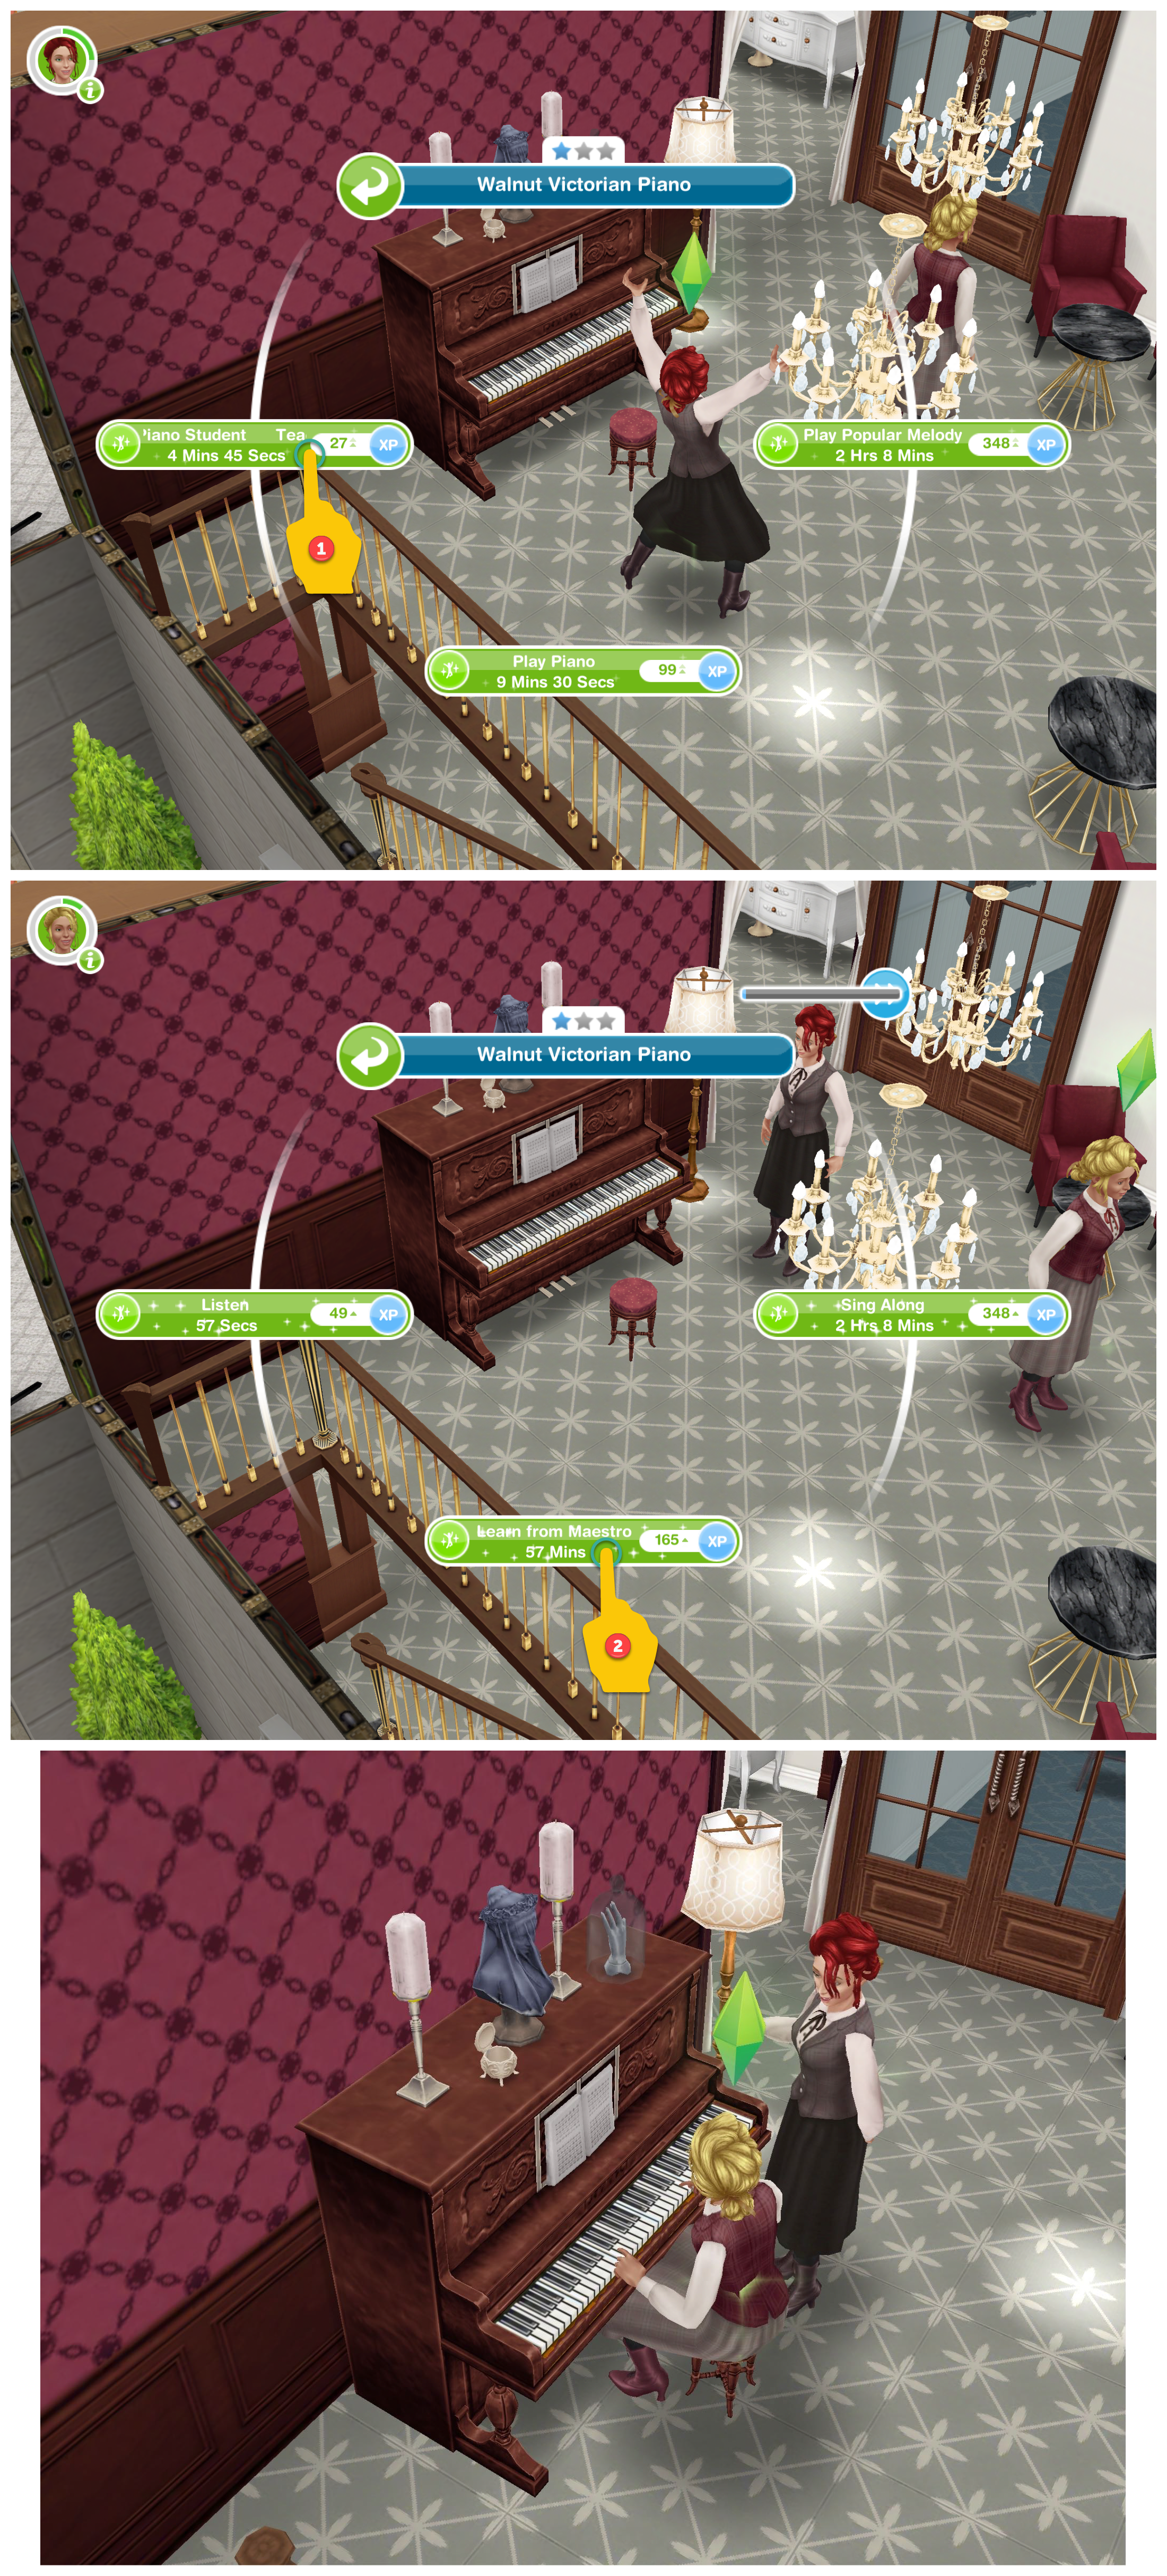 THE SIMS FREEPLAY Victorian Fantasy a.k.a Creator's Choice UPDATE